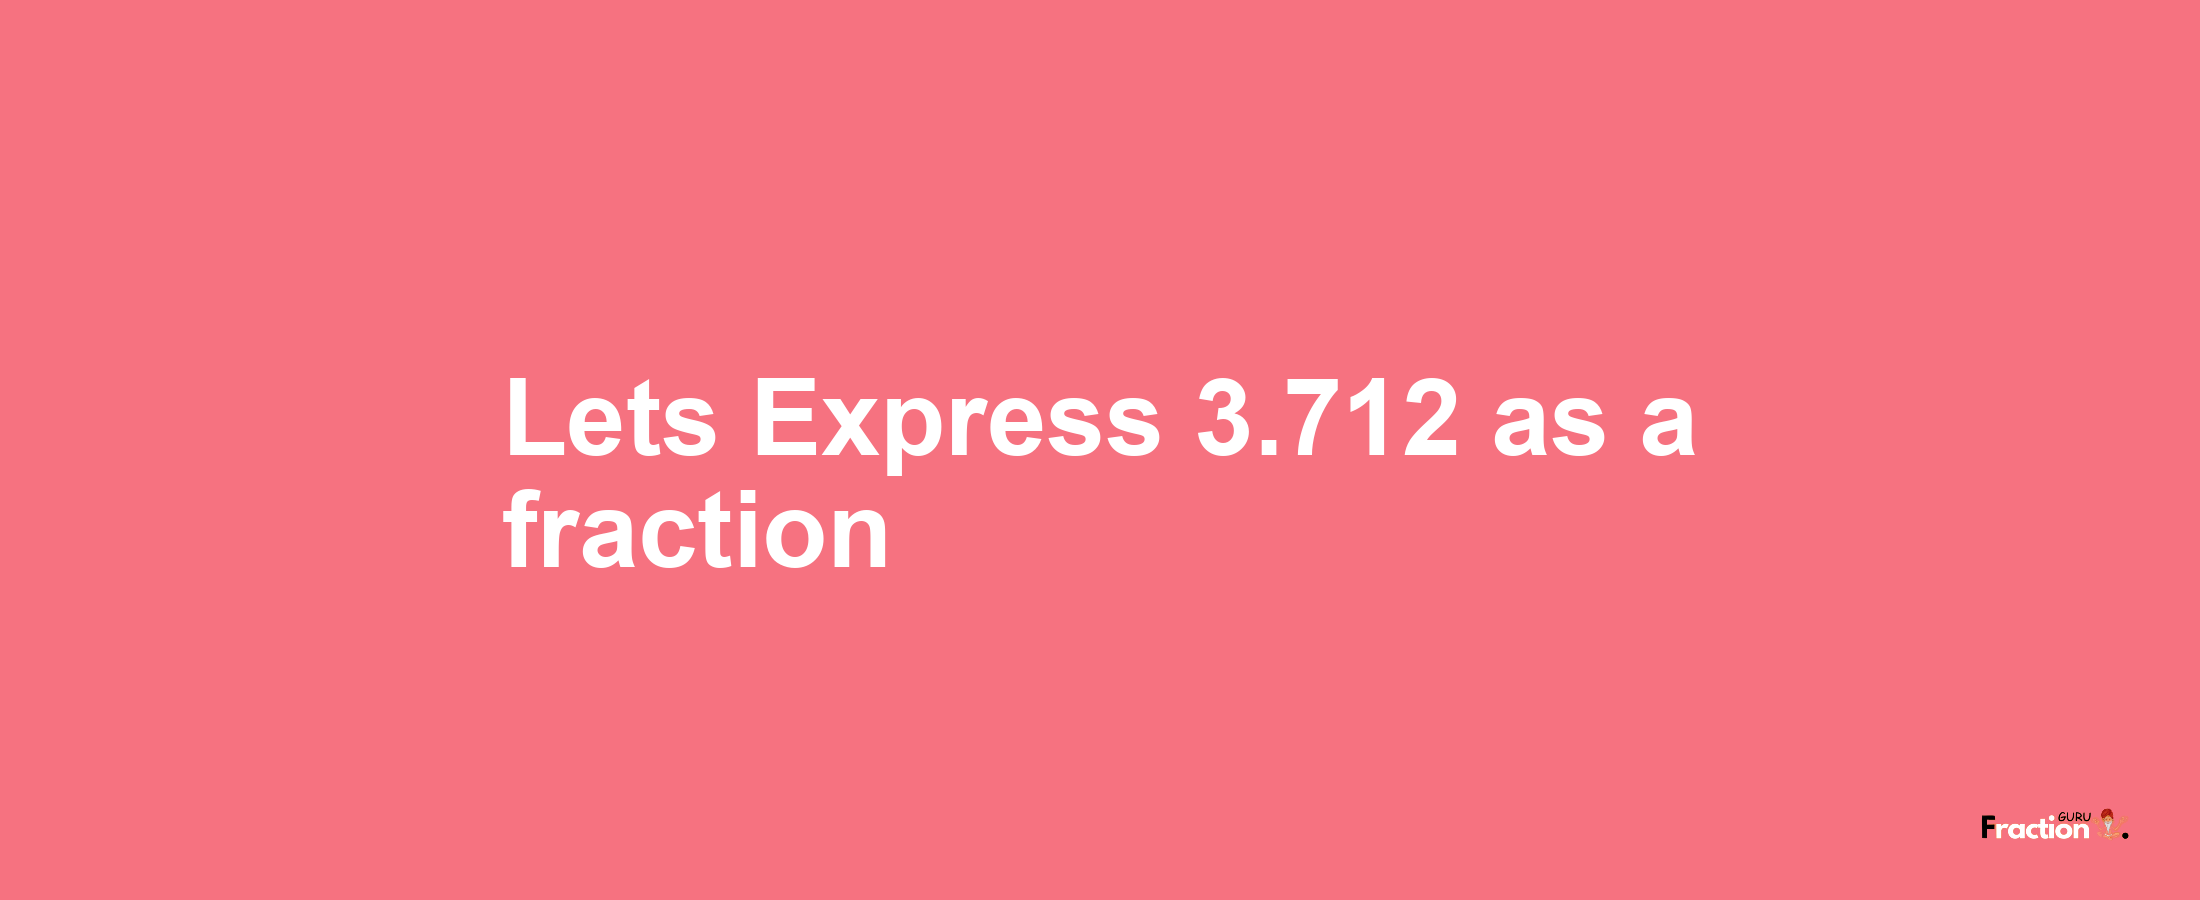 Lets Express 3.712 as afraction